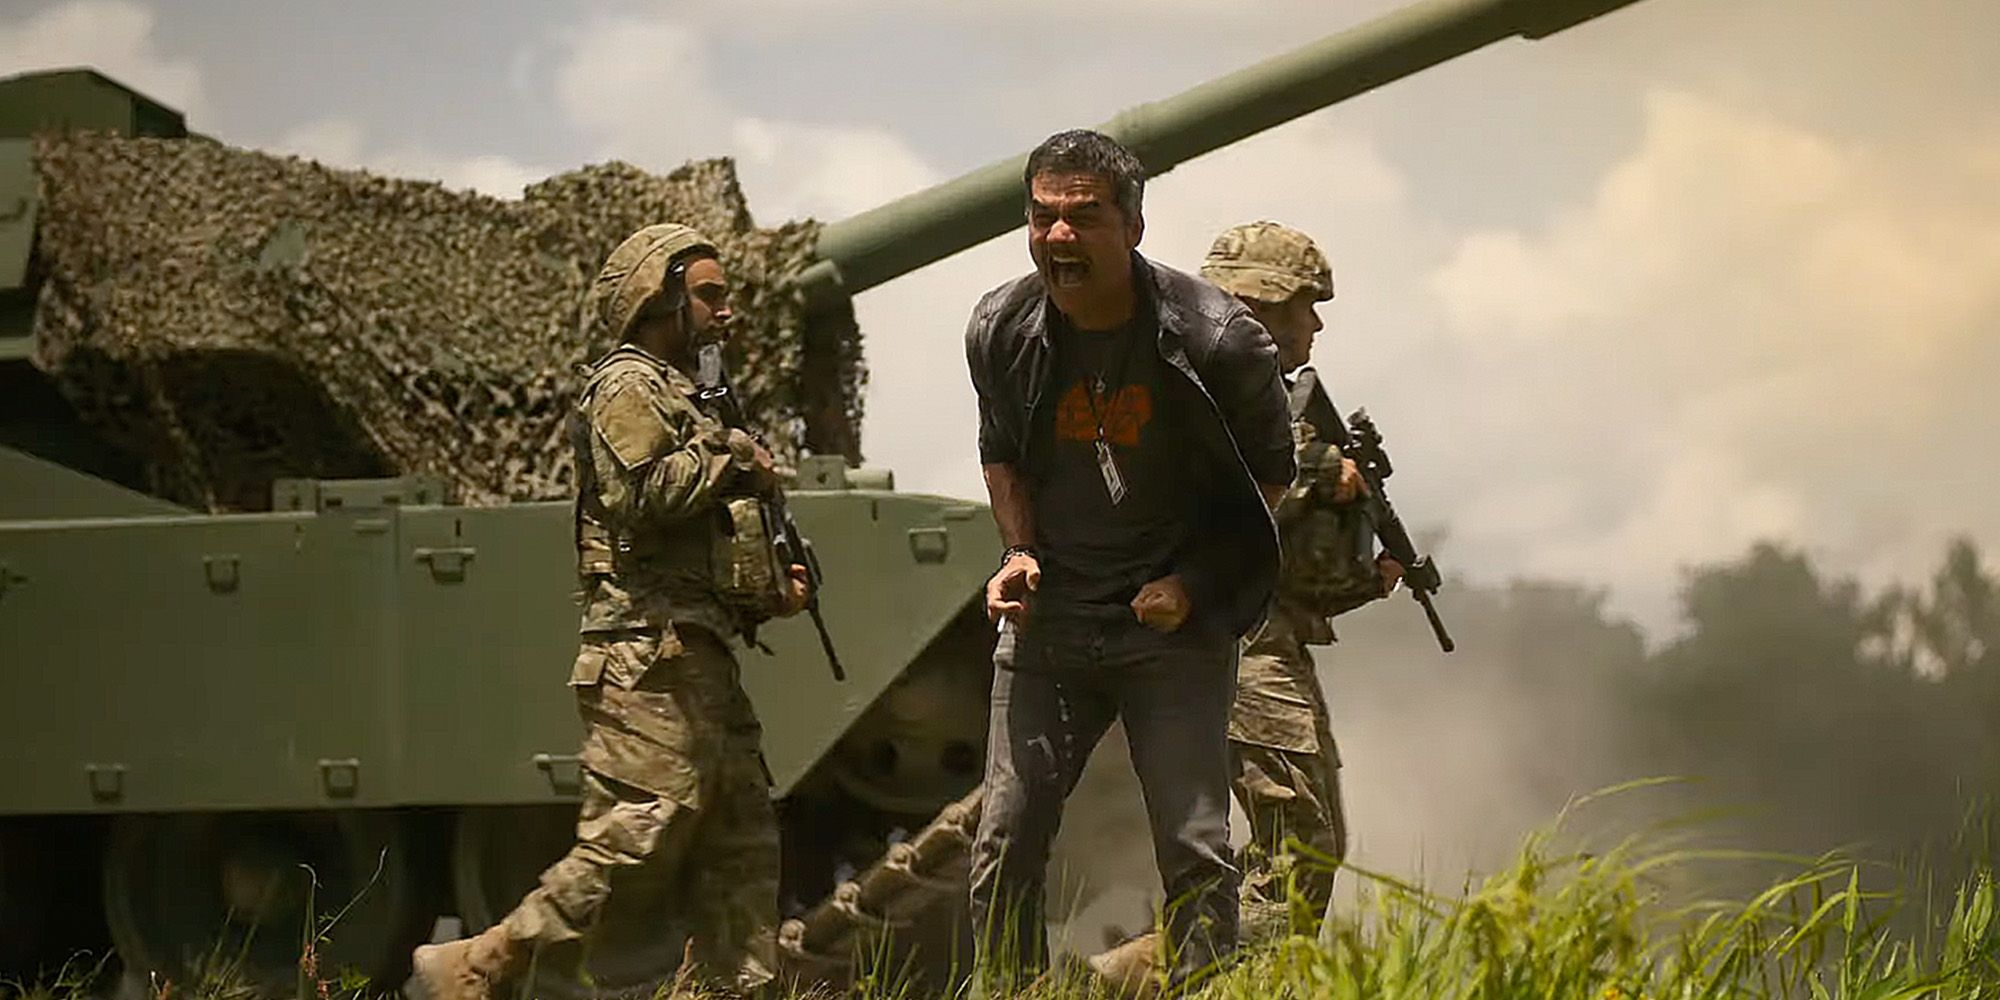 Wagner Moura as one of the journalists screaming with a tank behind him in Civil War